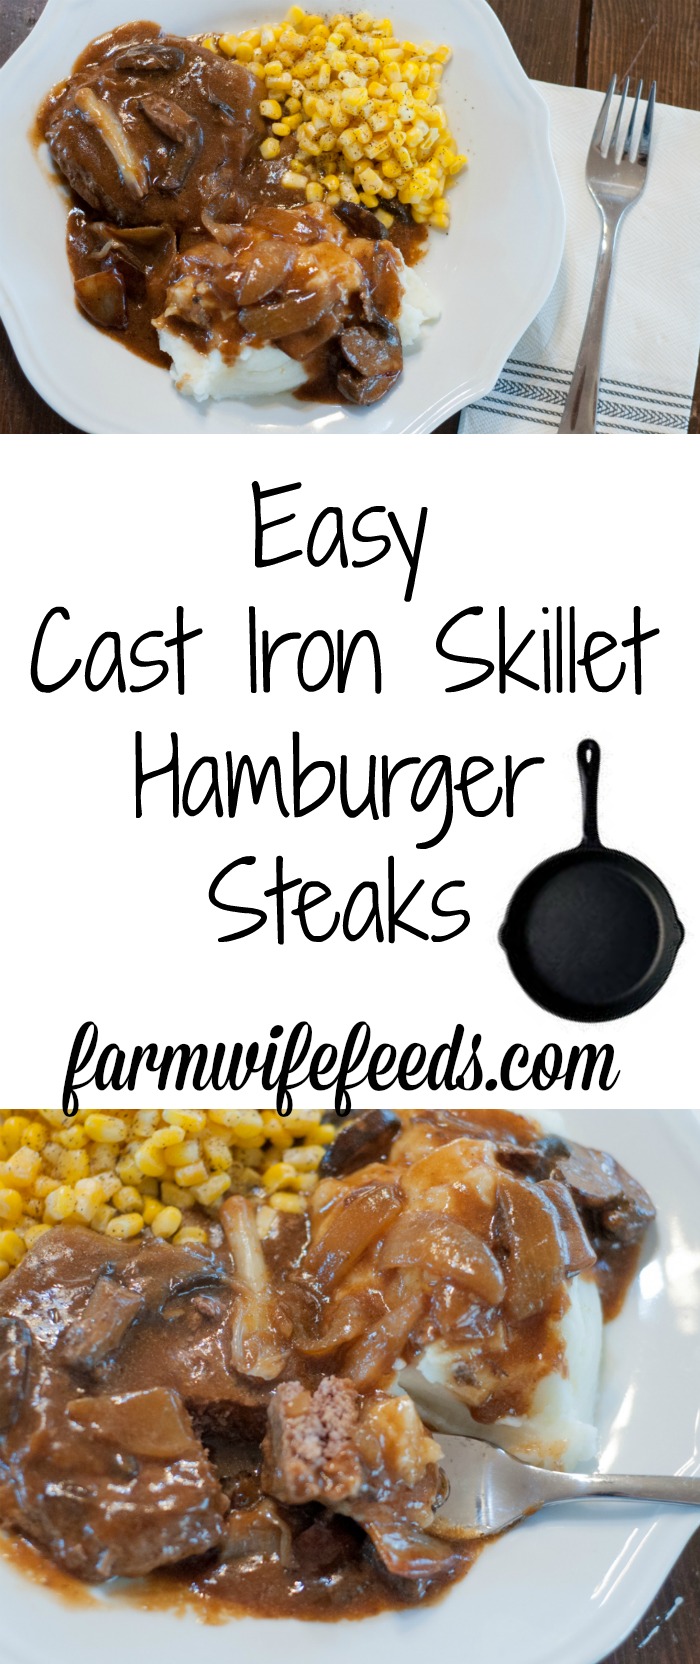 Easy Cast Iron Skillet Hamburger Steaks from Farmwife Feeds, comfort food that's family friendly. #recipes #castiron #beef #comfortfood